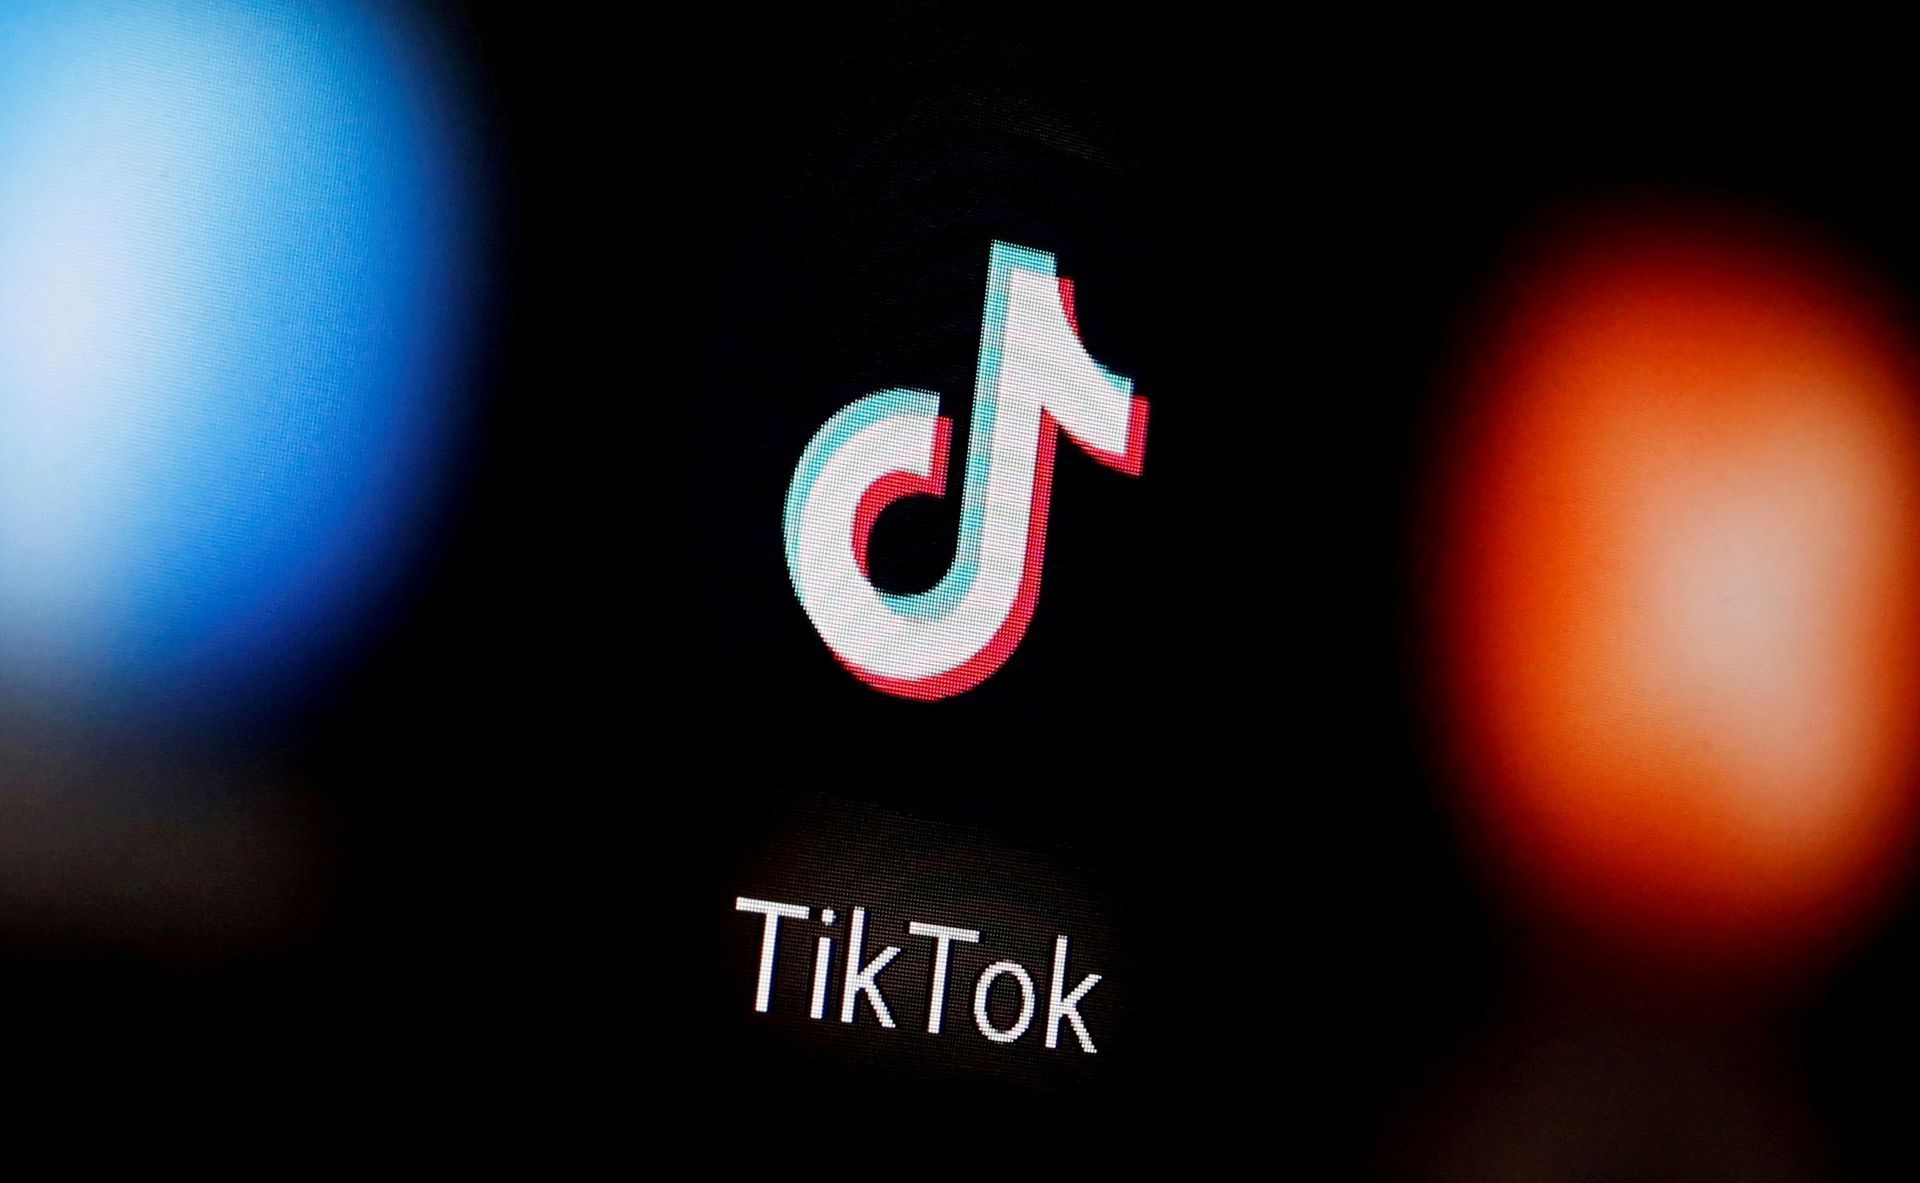 How to remove the red filter on TikTok: Silhouette challenge